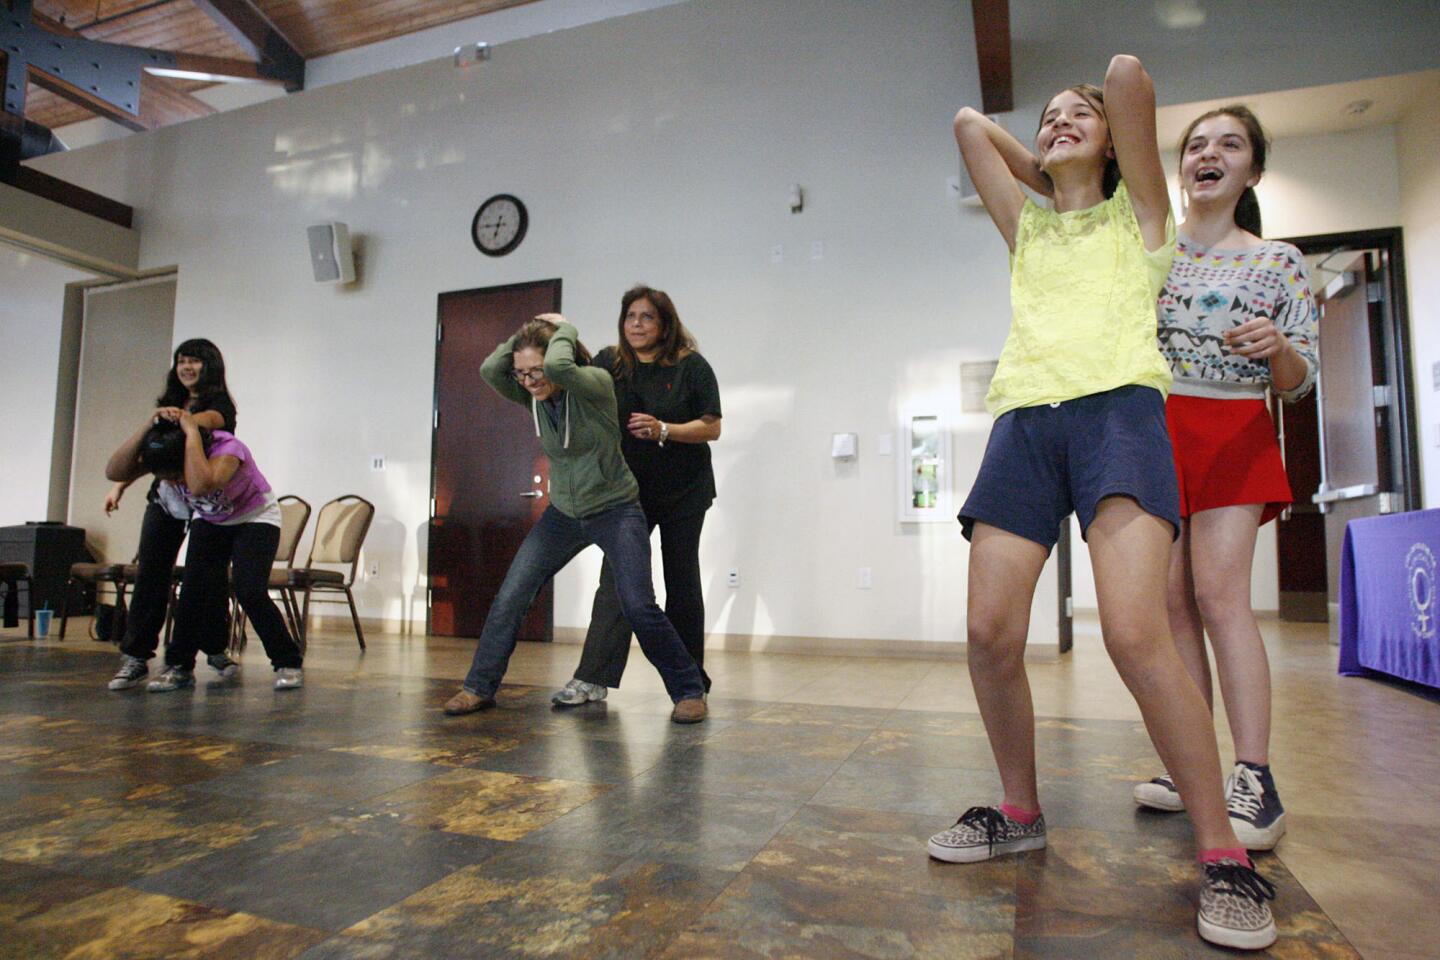 Alexandra Melkonians, 12, from left, Candice LeFranc, 11, Cassandra Pruett, Candice's mother, Ligia, Maritza Gonzalez, 12, and Dariana Peraza, 13, practice some moves during a self defense class, which took place at the Adult Recreation Center in Glendale on Wednesday, April 3, 2013. April is sexual assault awareness month. According to the U.S. Department of Justice's National Crime Victimization Survey, someone is sexually assaulted every two minutes.